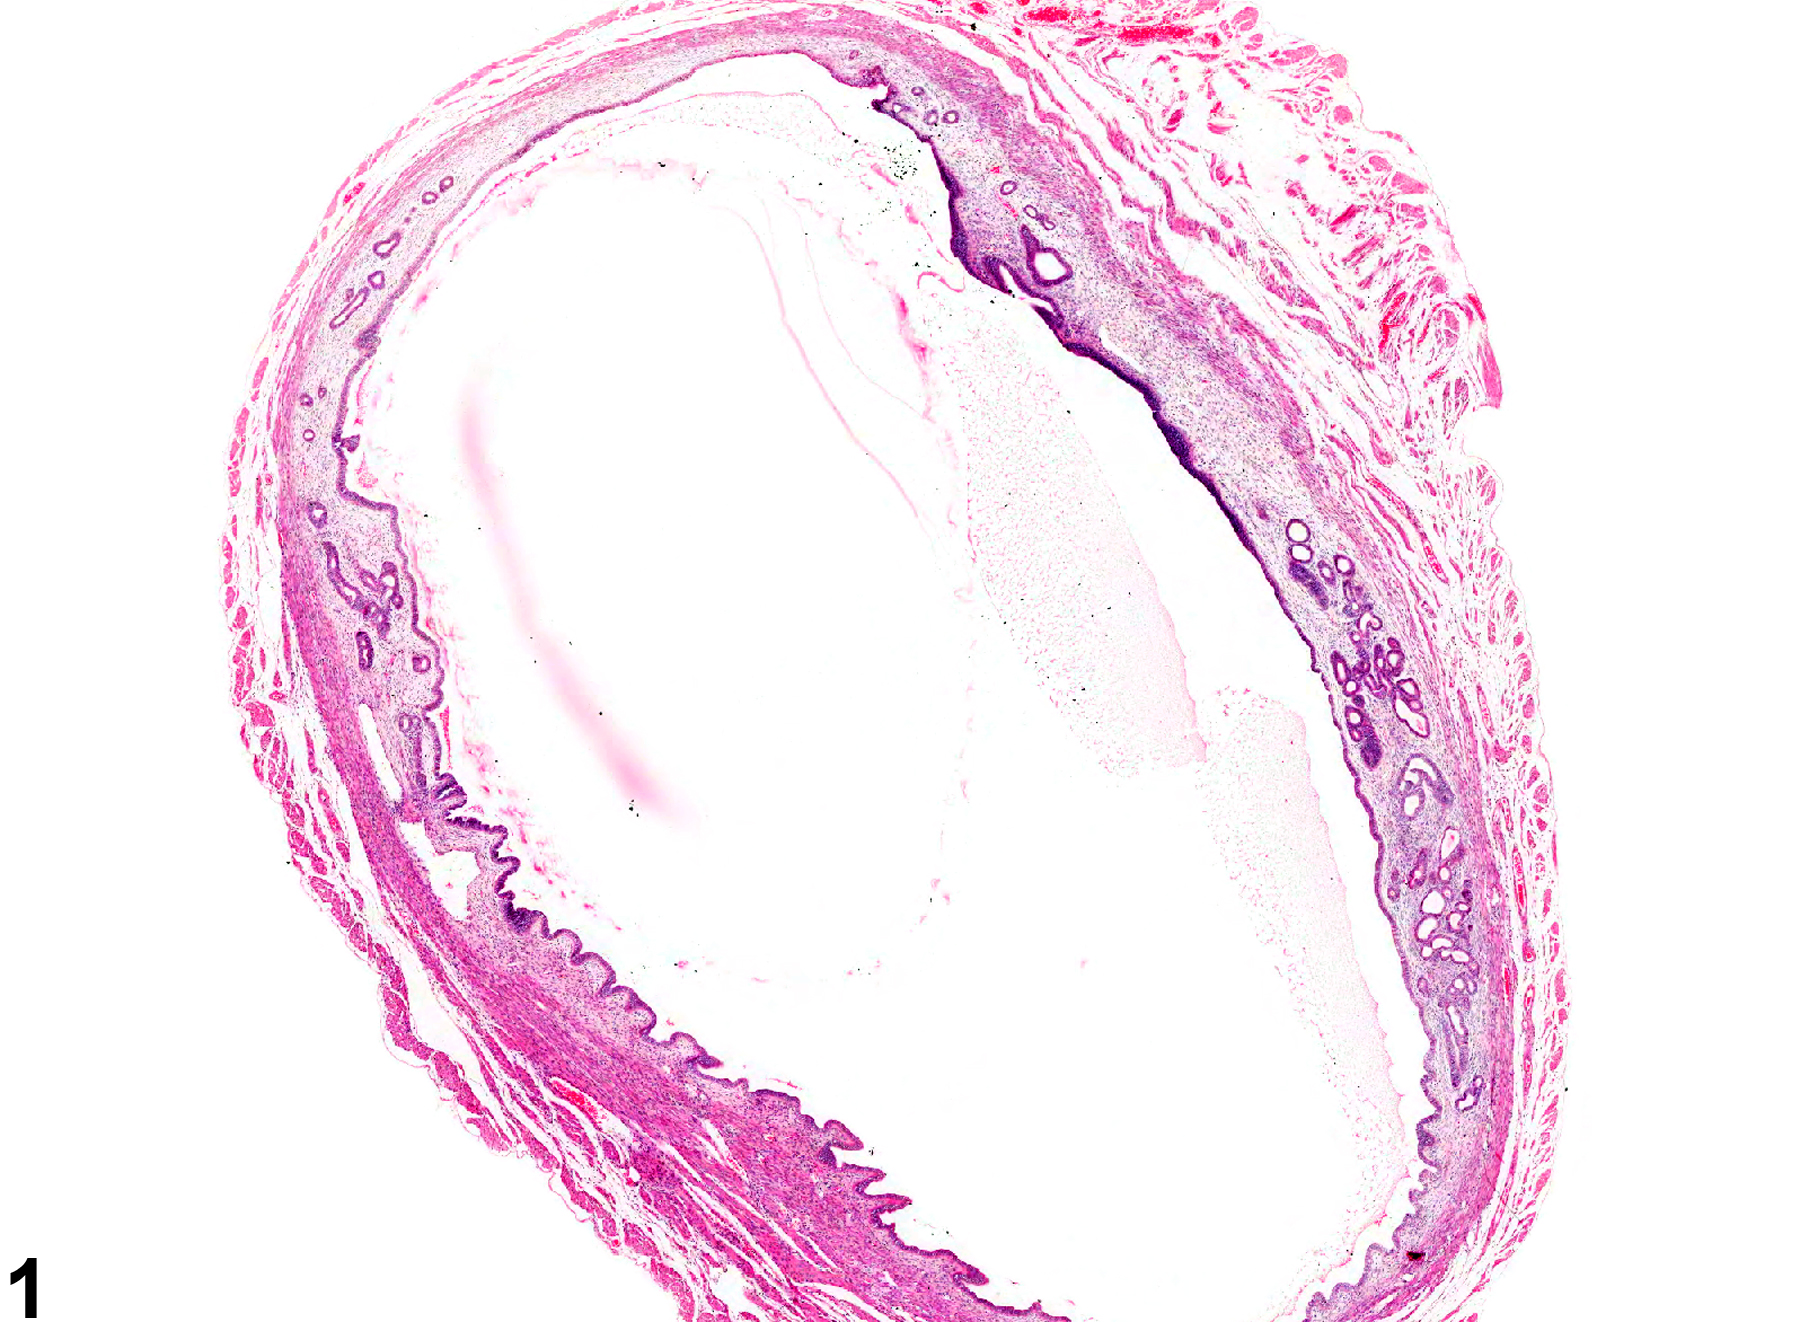 Image of dilation in the uterus from a female B6C3F1 mouse in a chronic study